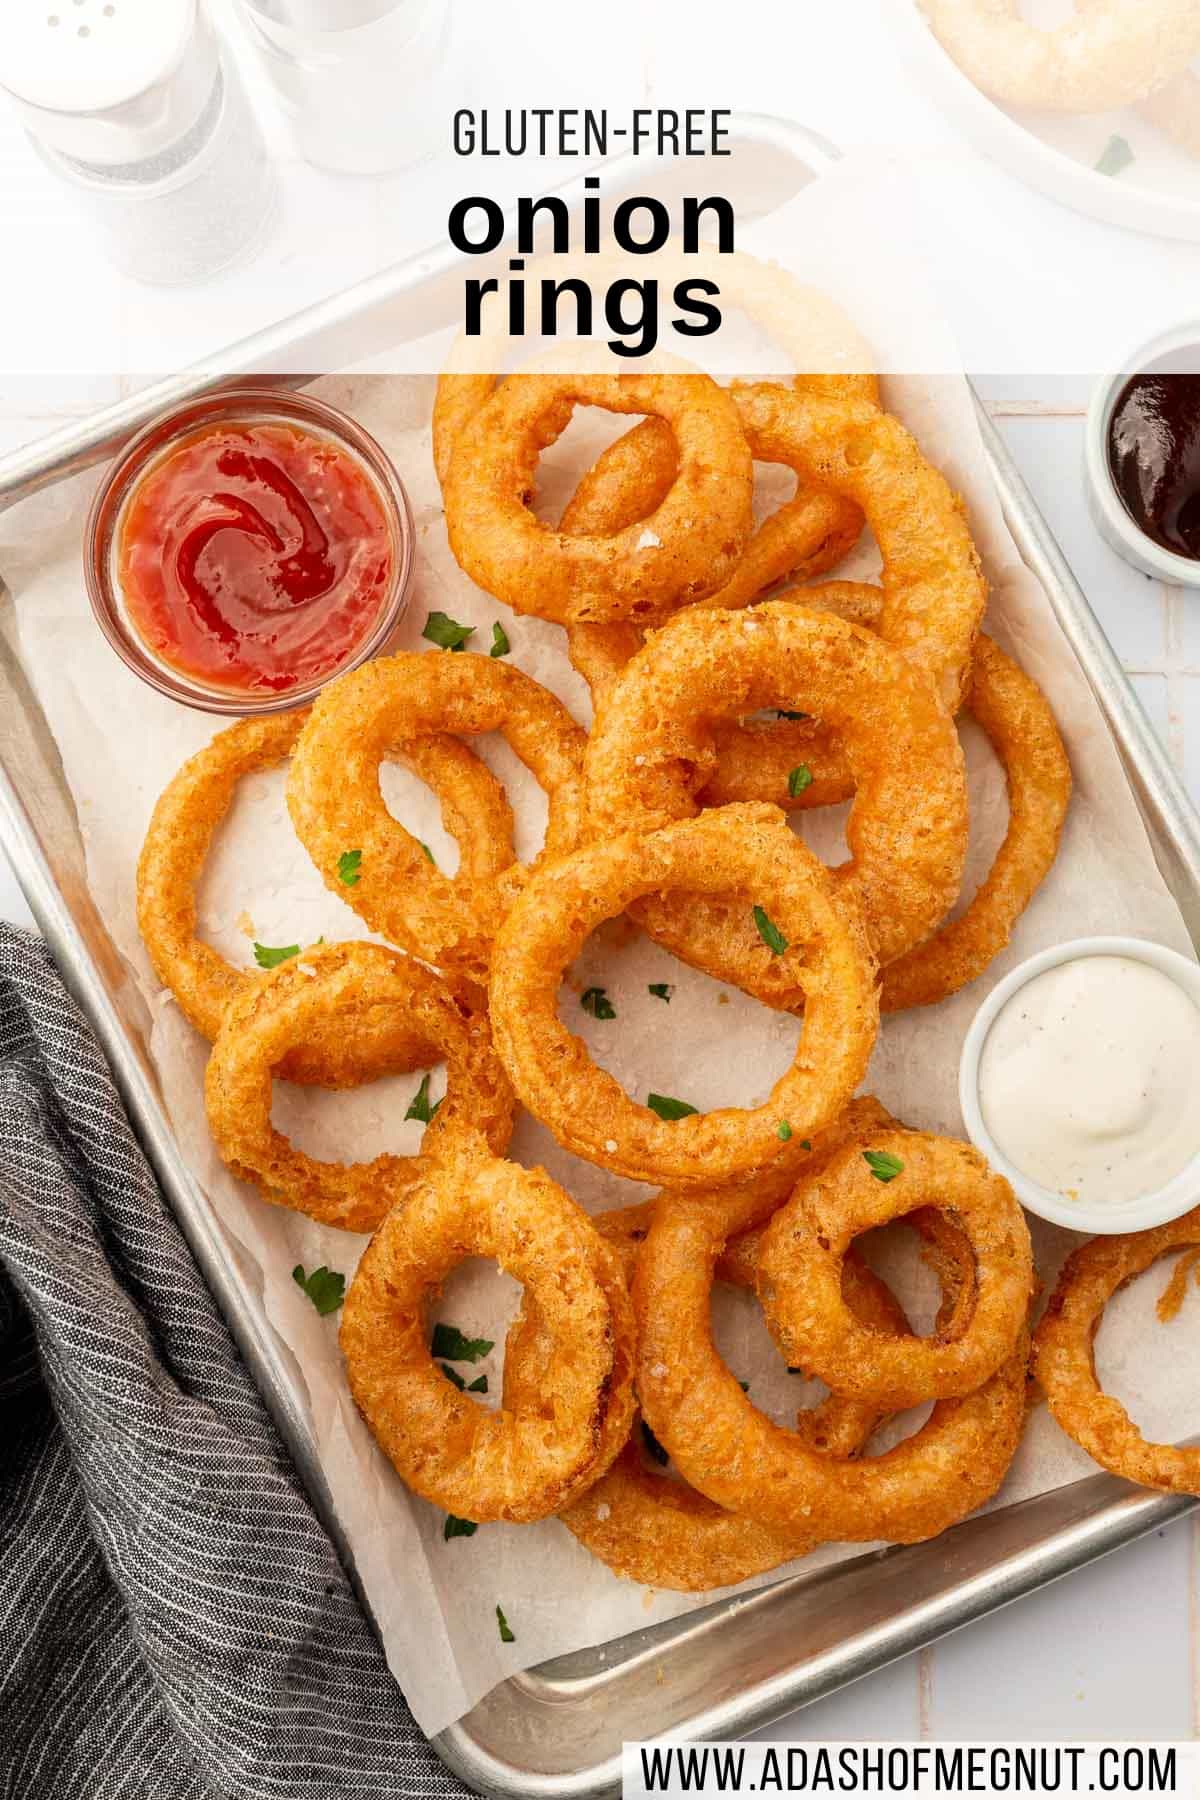 An overhead view of gf onion rings on a parchment lined baking sheet with bowls of ranch and ketchup.